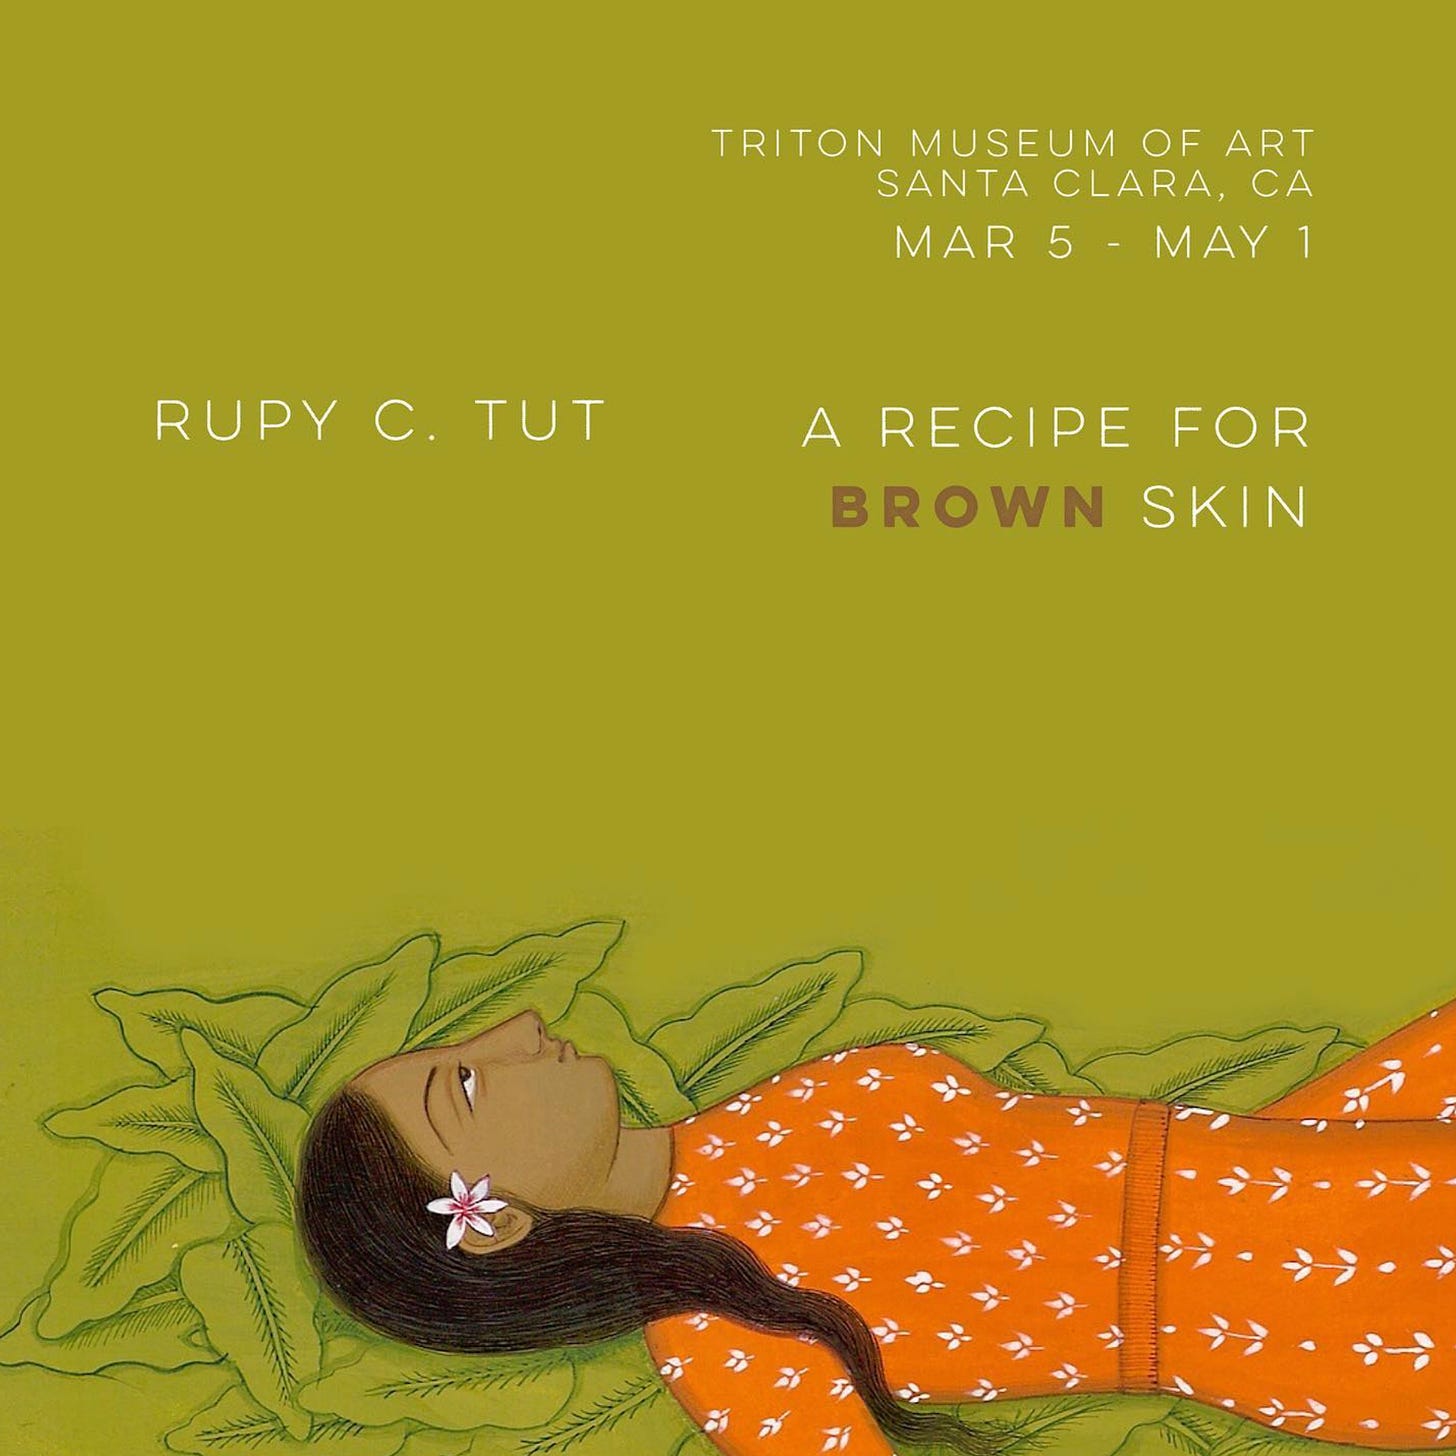 Flyer for A Recipe for Brown Skin by Rupy C. Tut at Triton Museum of Santa Clara from March 5 to May 1, 2022. It includes a close up of a brown woman laying on a bed of leaves staring up at the sky. A flower is tucked into her ear, and she is wearing an orange dress with a small pattern of white leaves on it.